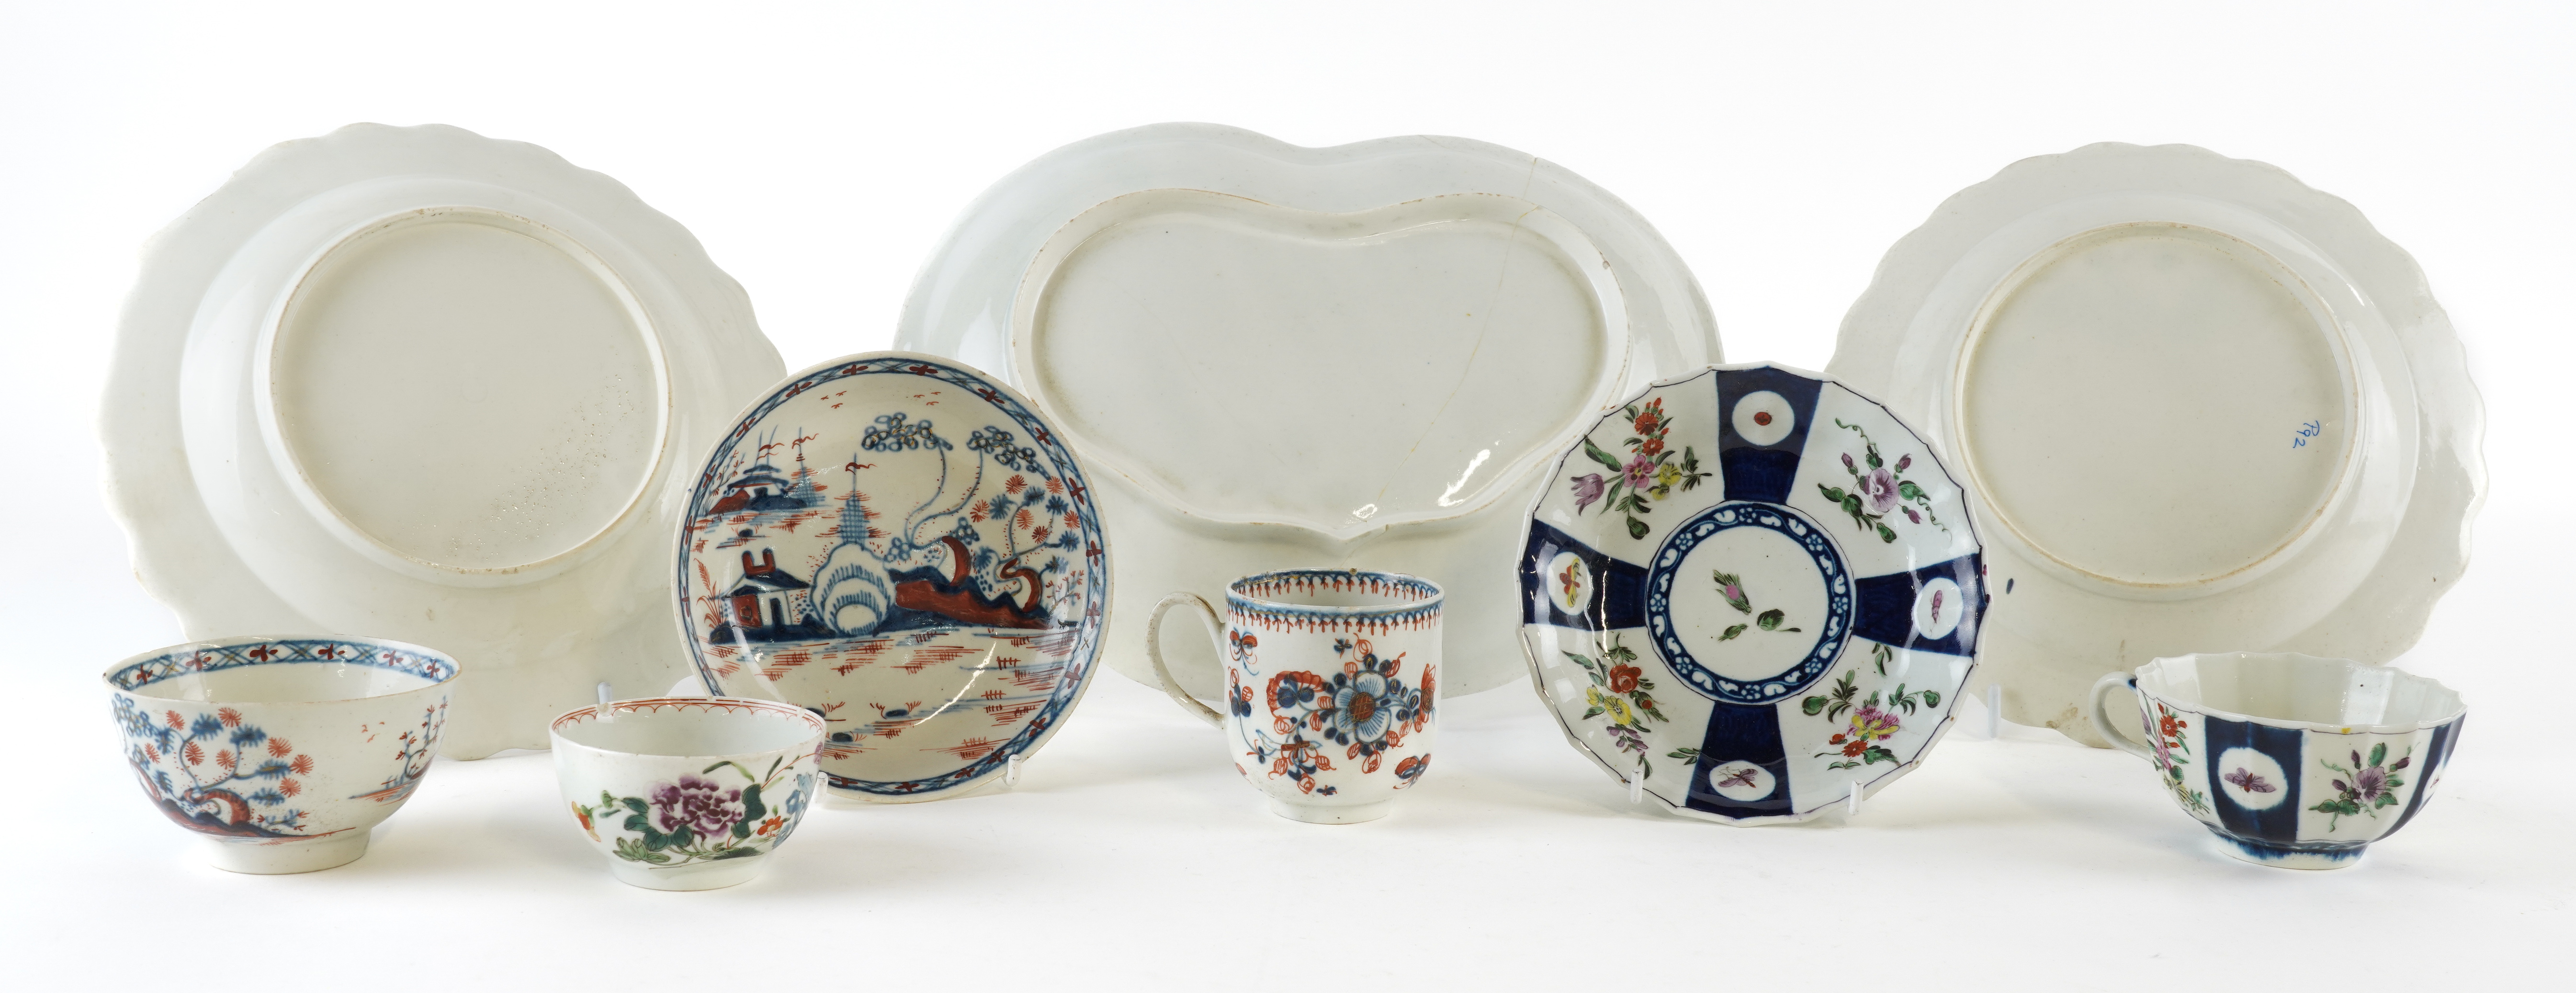 A GROUP OF ENGLISH PORCELAIN - Image 2 of 2